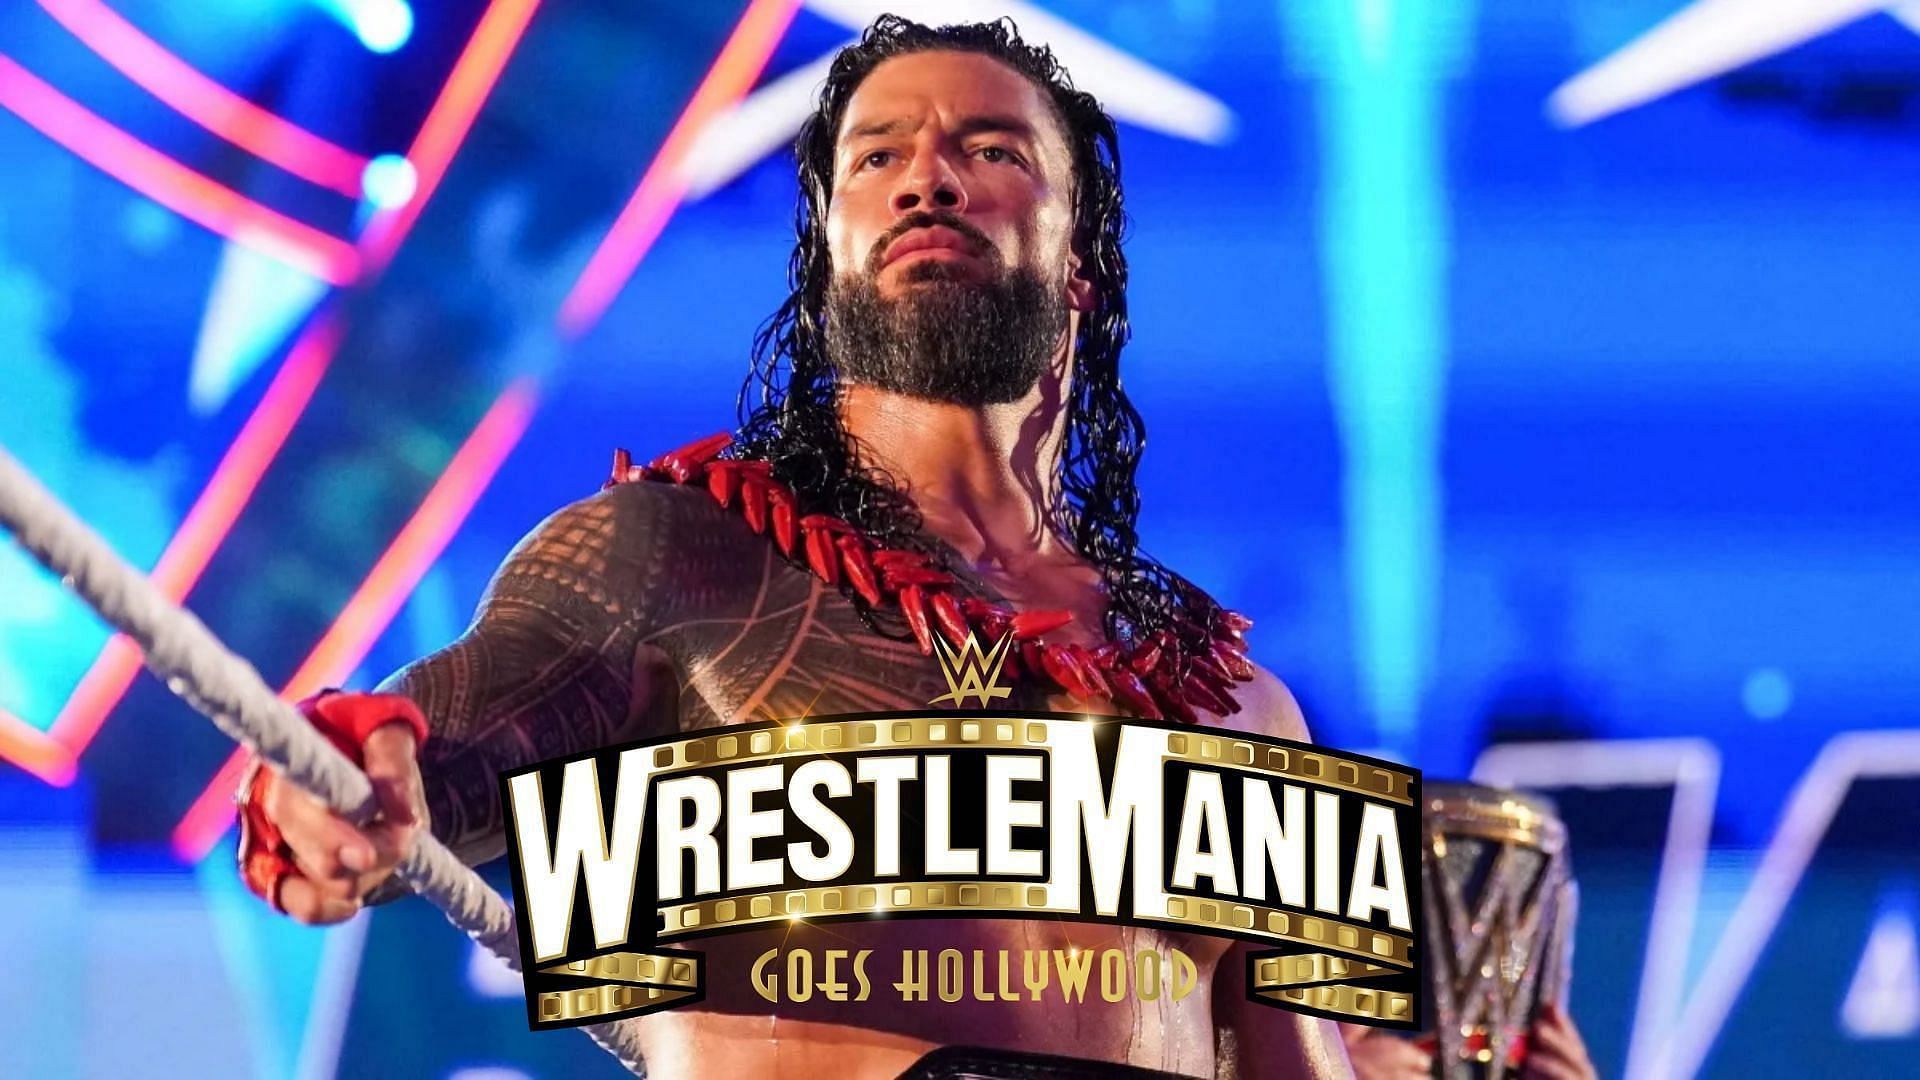 Roman Reigns may have a legendary opponent at Mania